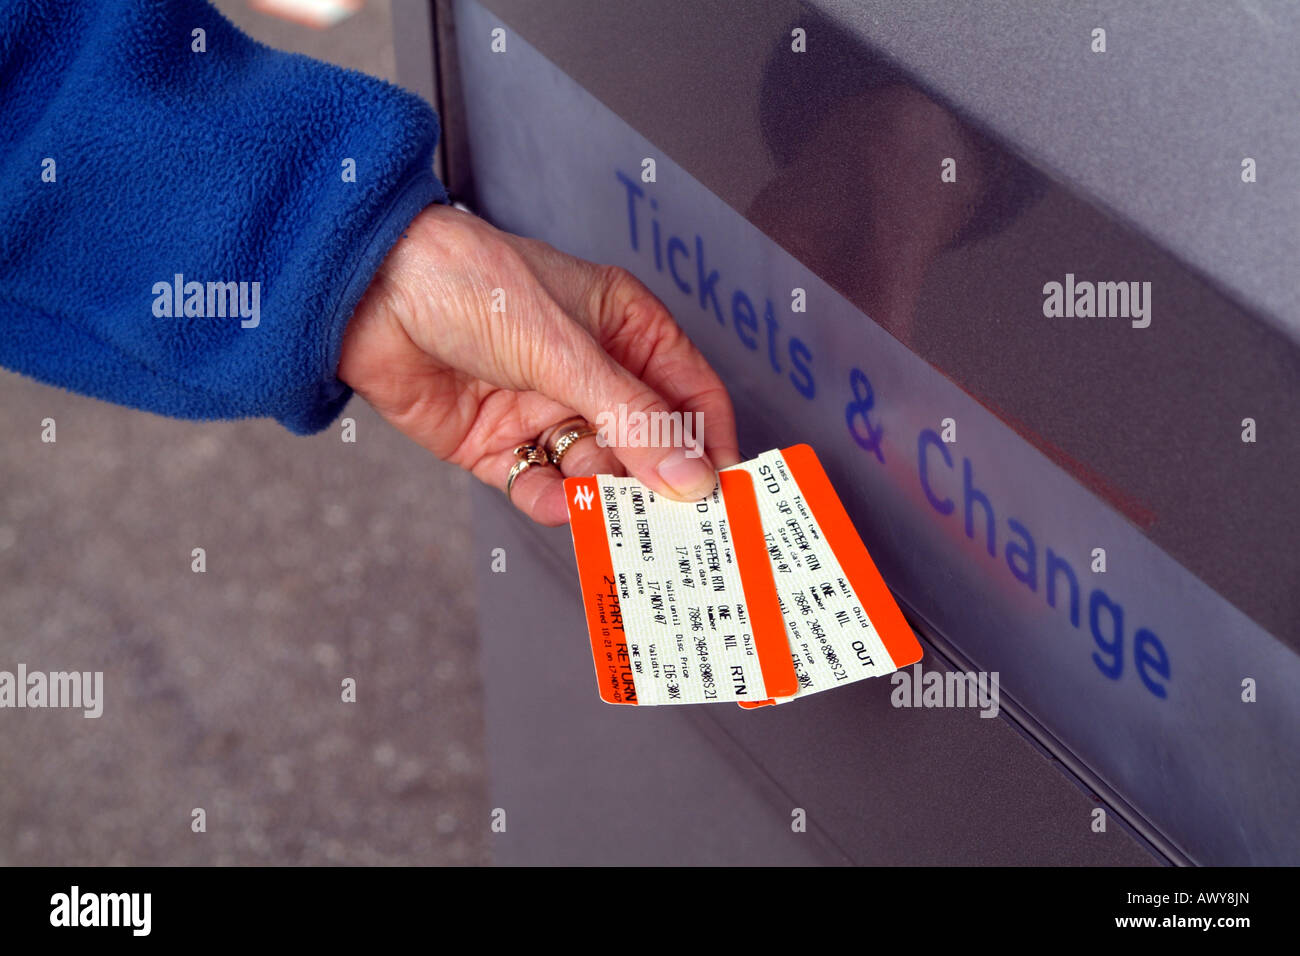 Customers Hand with Two Part Return Tickets for use with South West Trains Self Service Railway Ticket Machine Dispenser Stock Photo